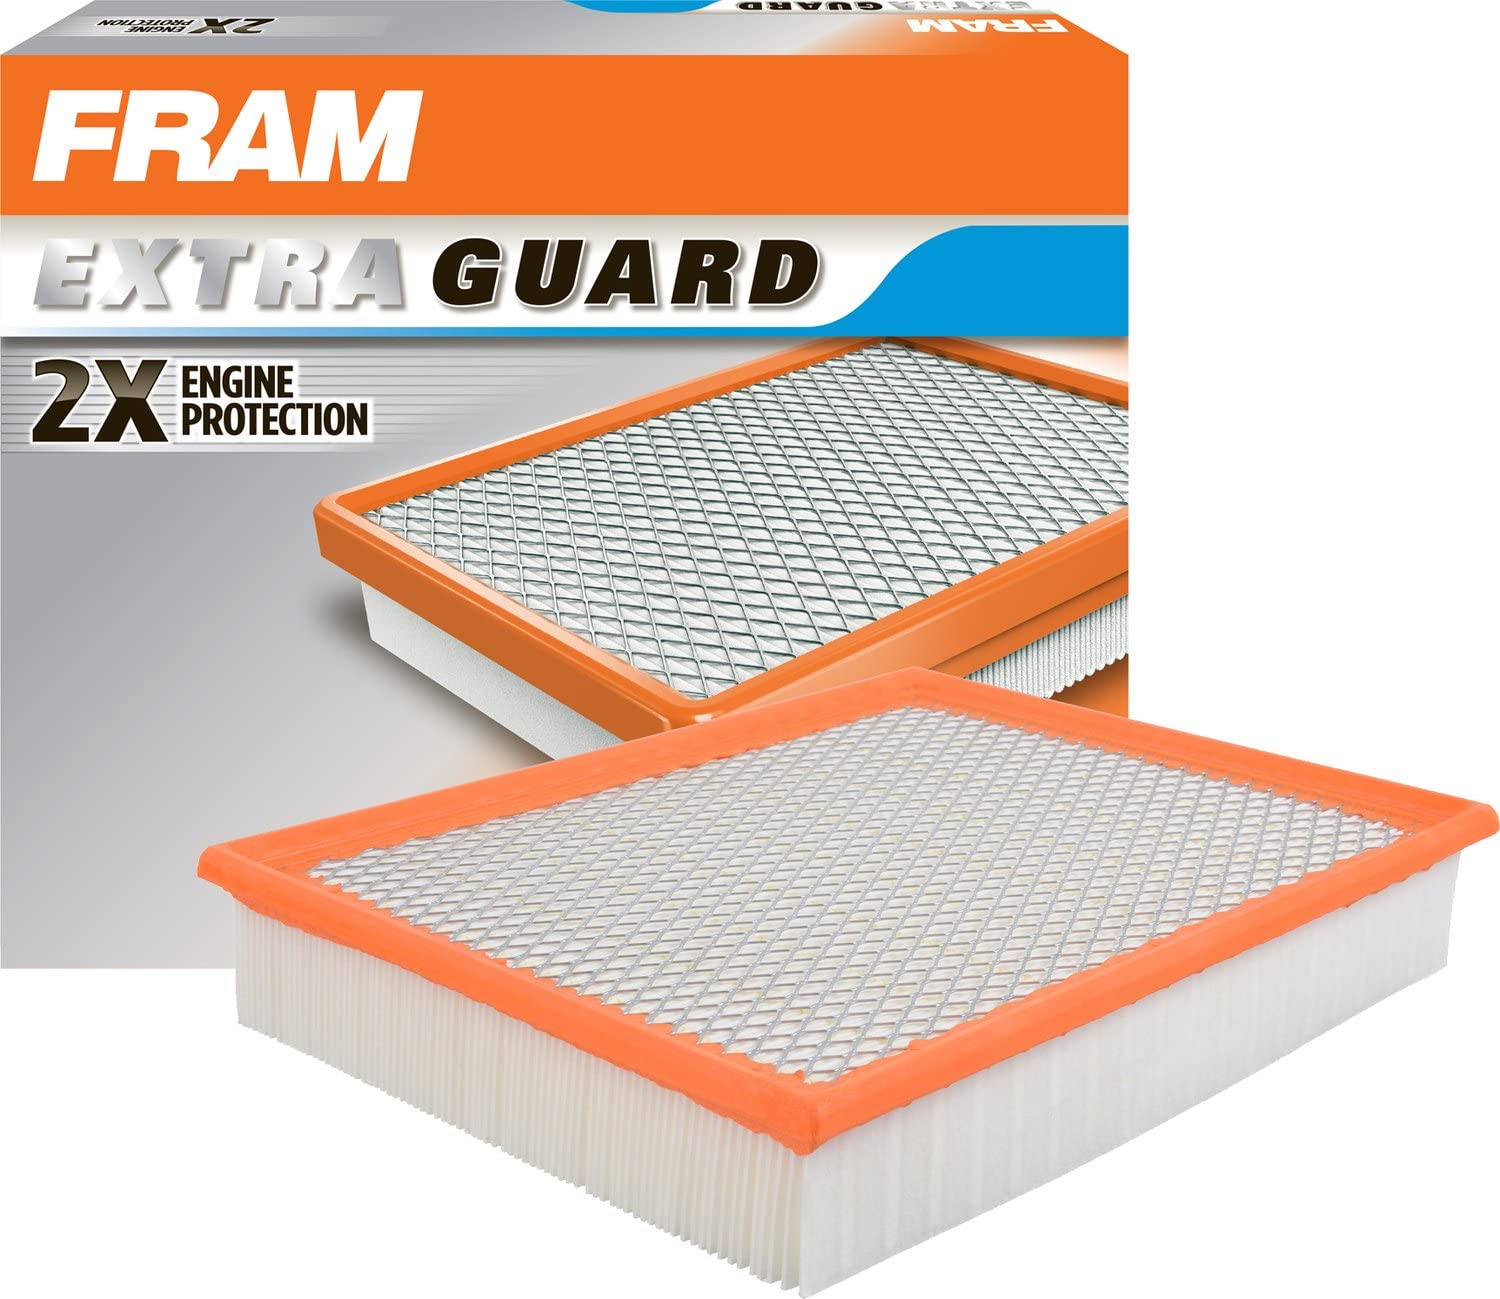 FRAM Extra Guard CA8755A Replacement Engine Air Filter for Select Cadillac, Chevrolet, and GMC Models, Provides Up to 12 Months or 12,000 Miles Filter Protection